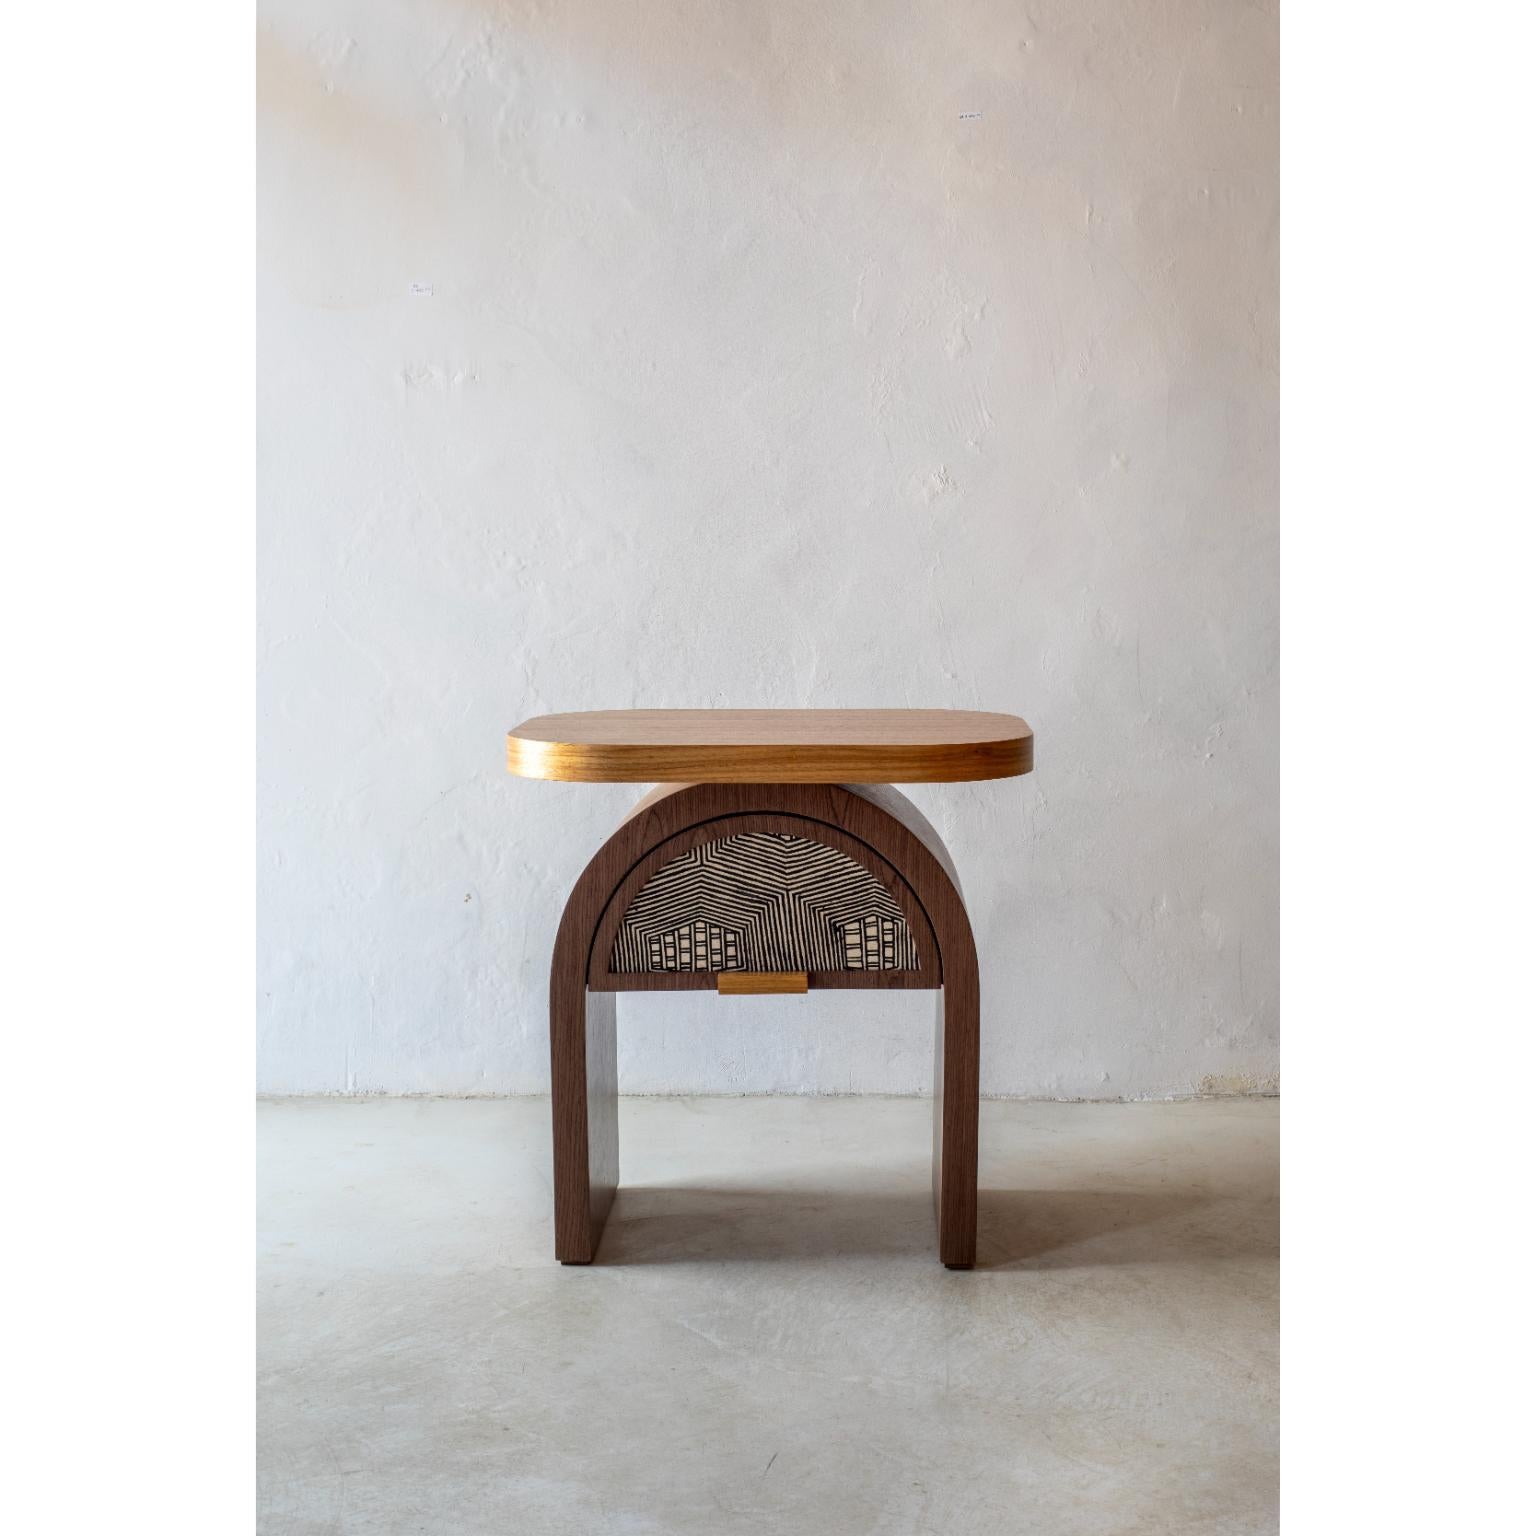 Arco Side Table by Gabriela Campos
Dimensions: D 45 x W 60 x H 60 cm.
Materials: Freijó wood with imbuia finish and hand-painted fabric.

The essence of this capsule of 4 pieces is a dialog between the Art Déco
movement and the indigenous graphics